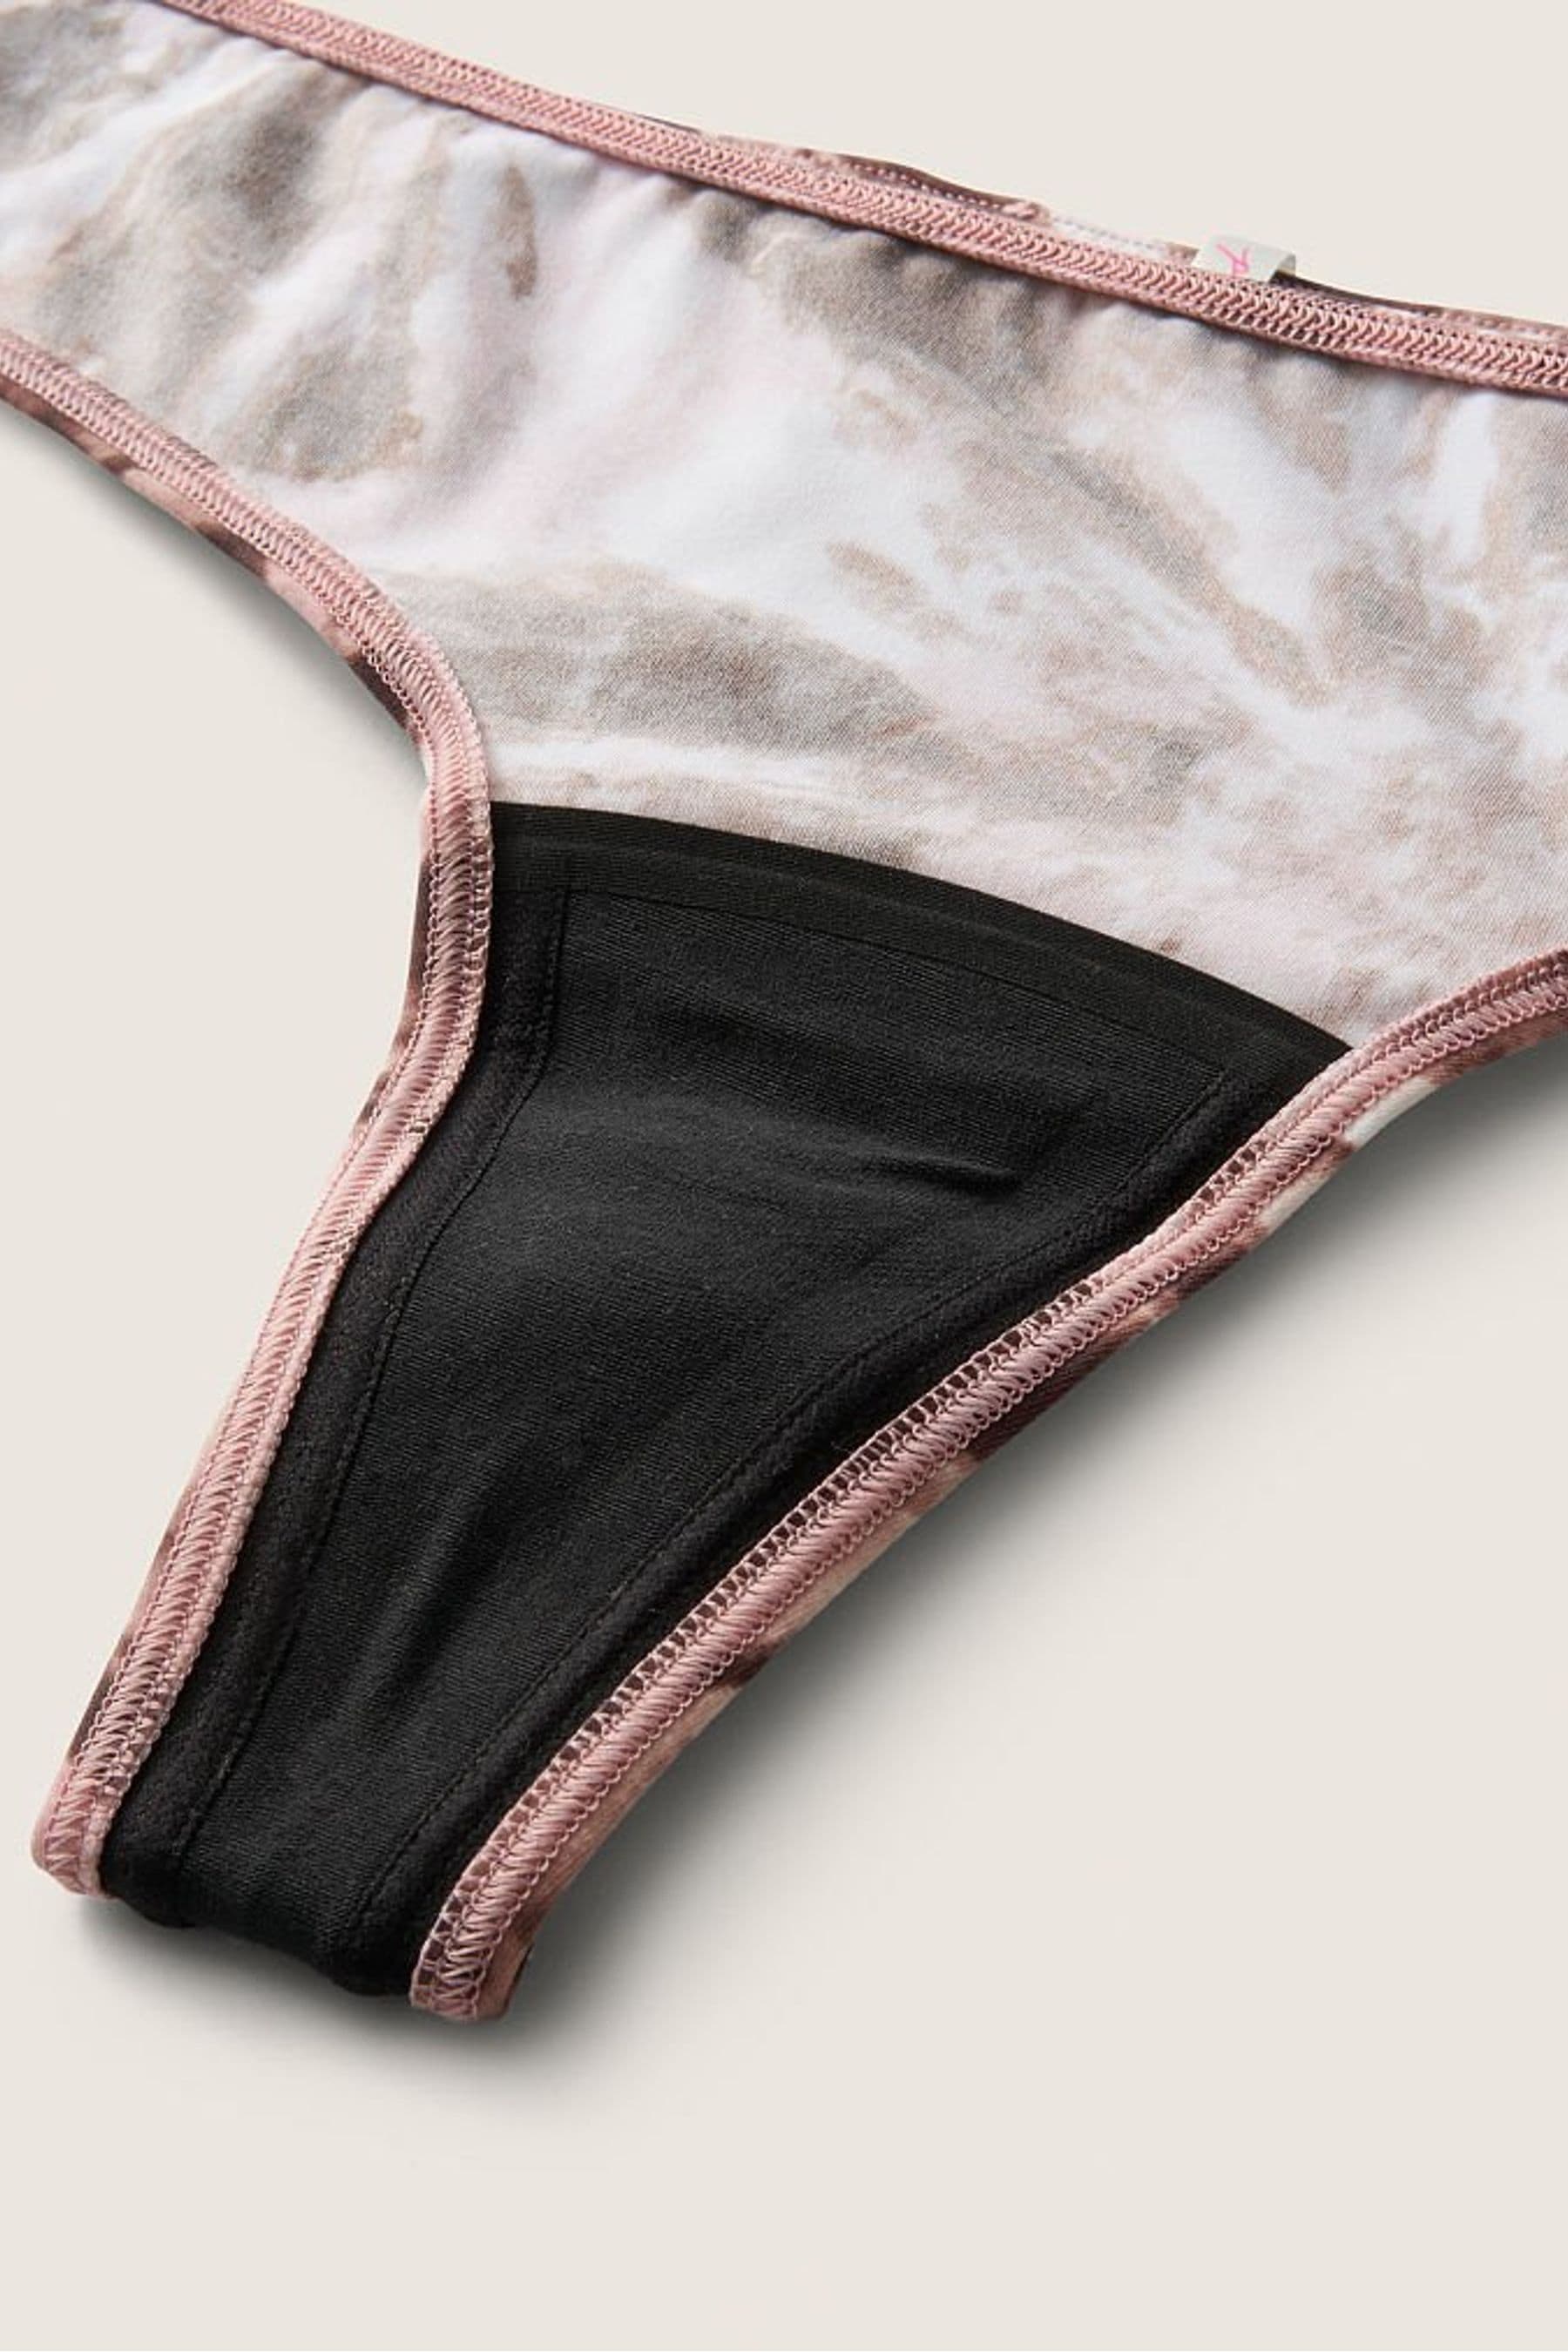 Buy Victoria's Secret PINK Period Panty Thong from the Victoria's